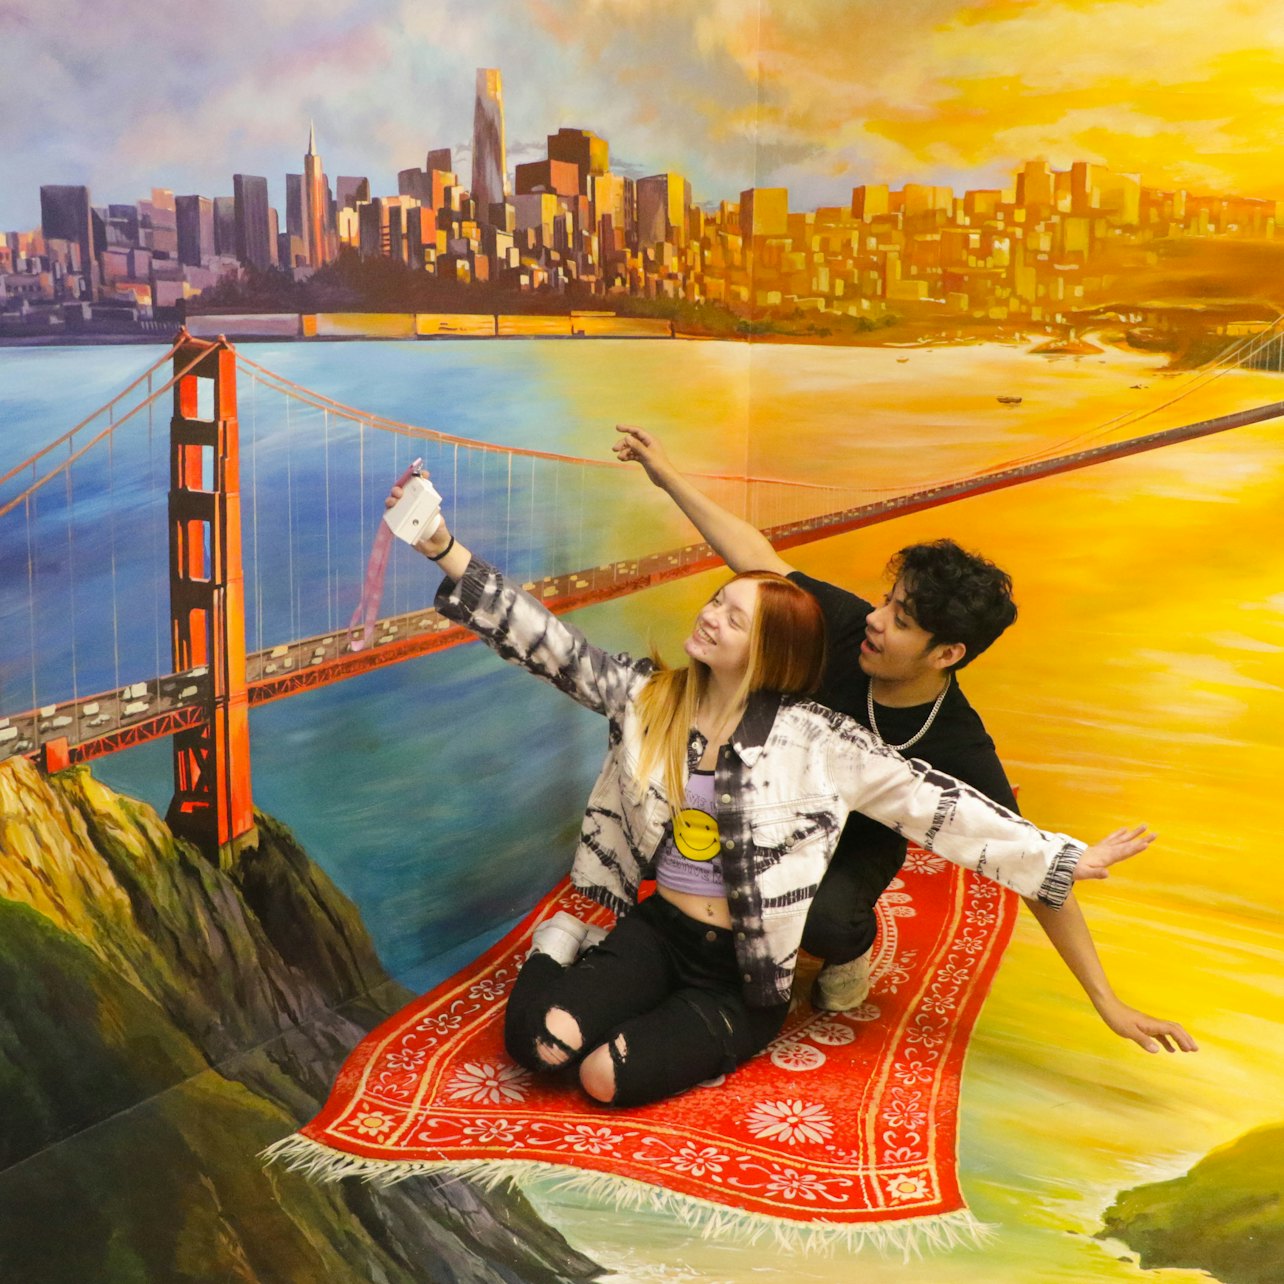 Museum of 3D Illusions - Accommodations in San Francisco